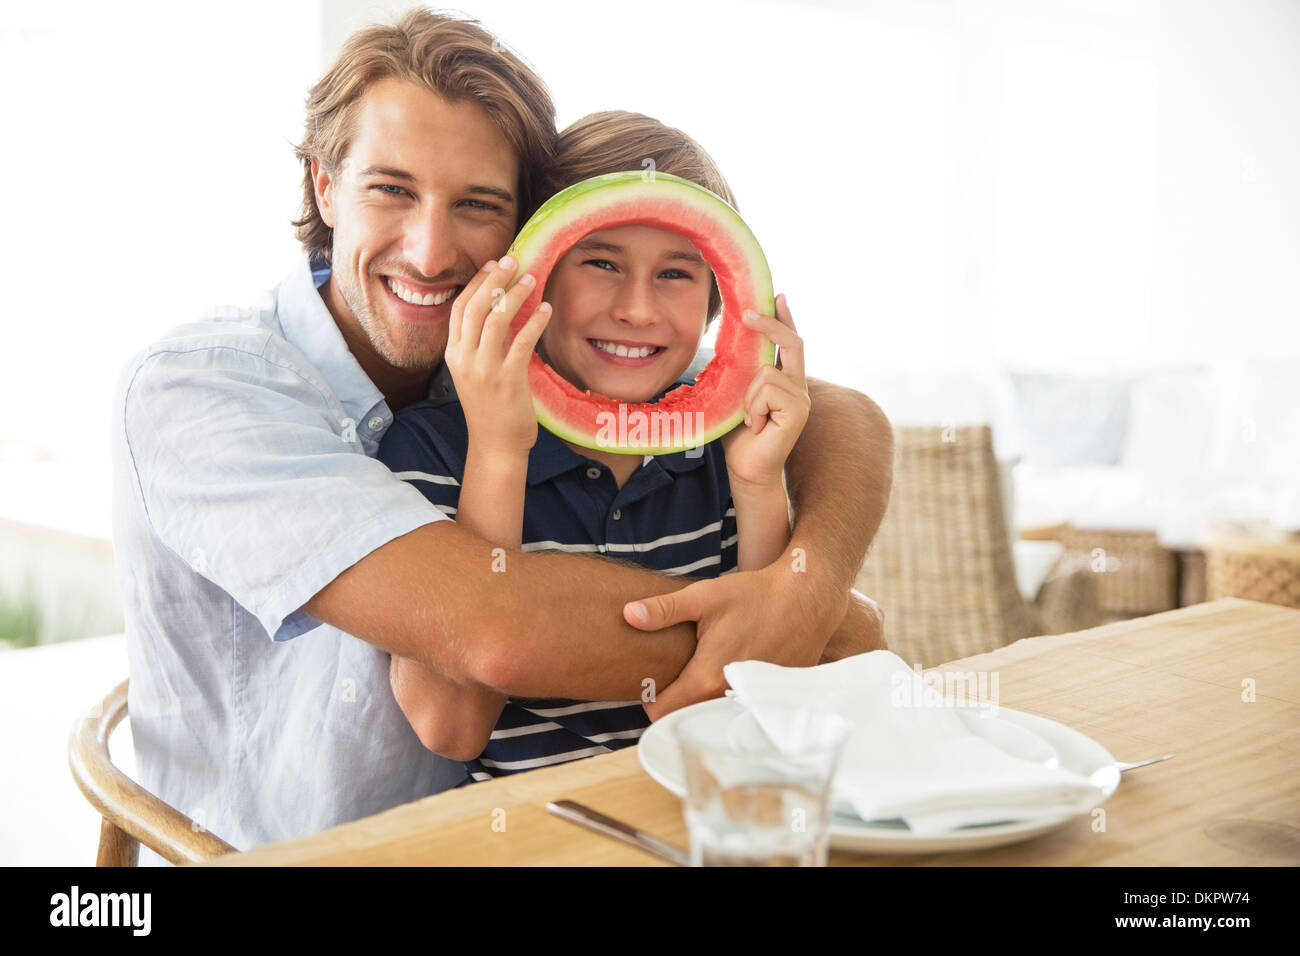 Father and son playing with food at table Stock Photo